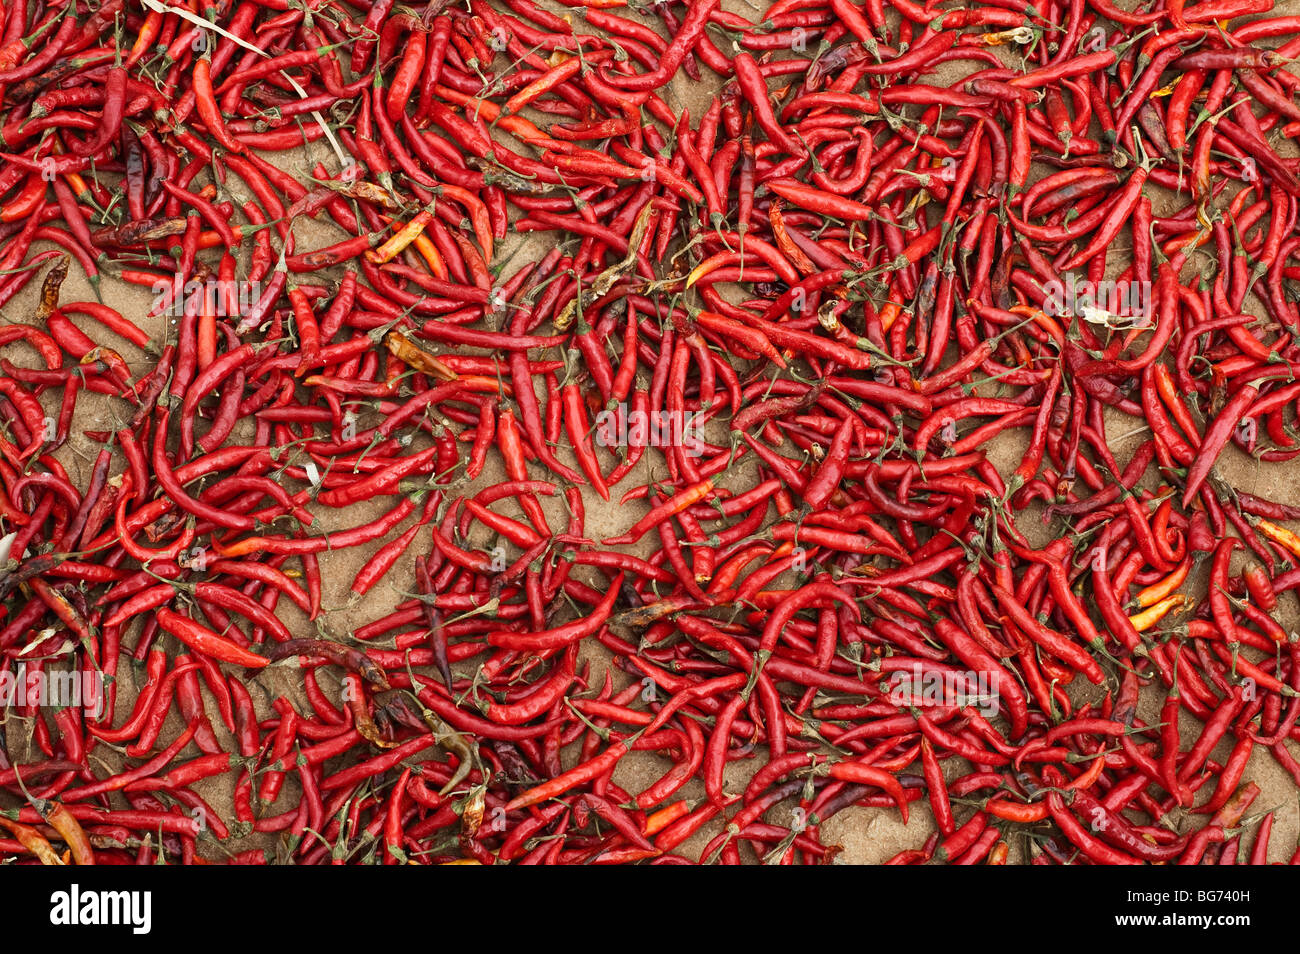 Red chilli's drying in the sun in India Stock Photo